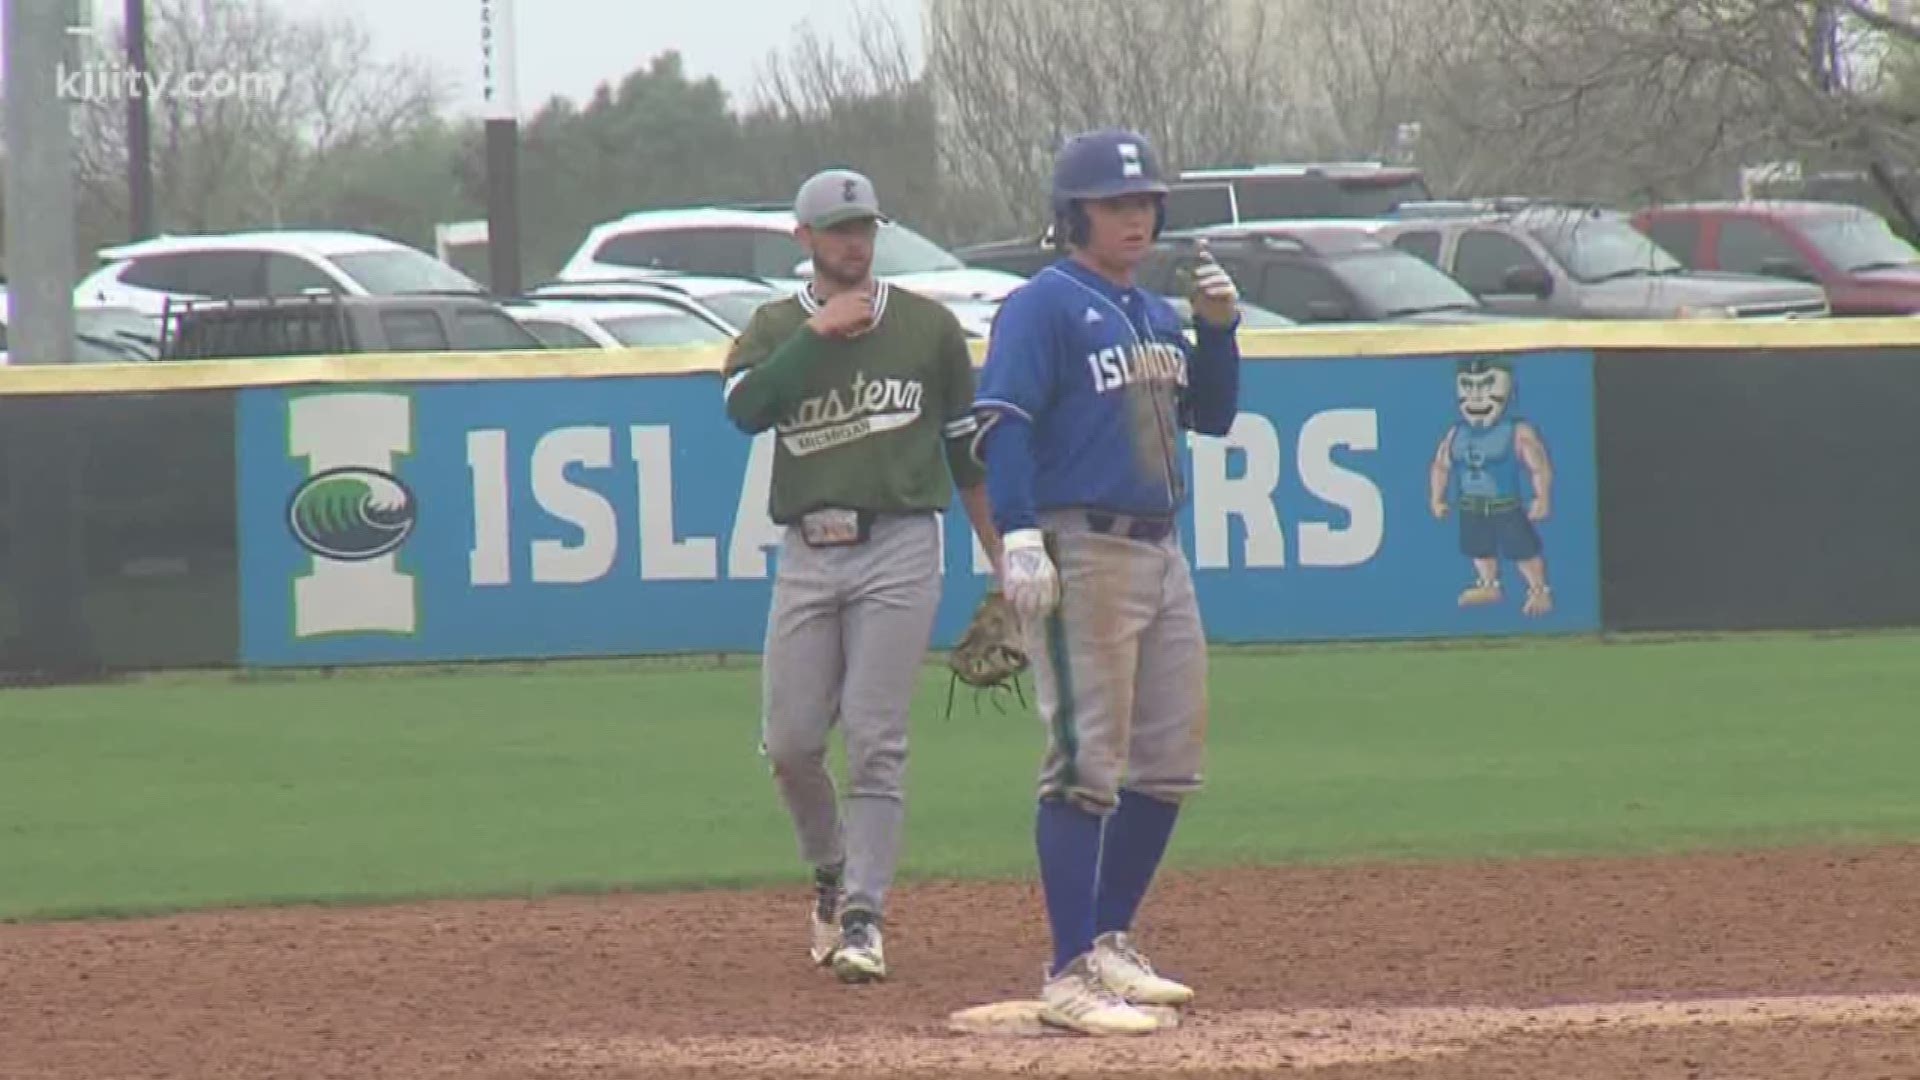 Texas A&M-Corpus Christi baseball completed a series sweep of Eastern Michigan on Sunday by picking up two wins.